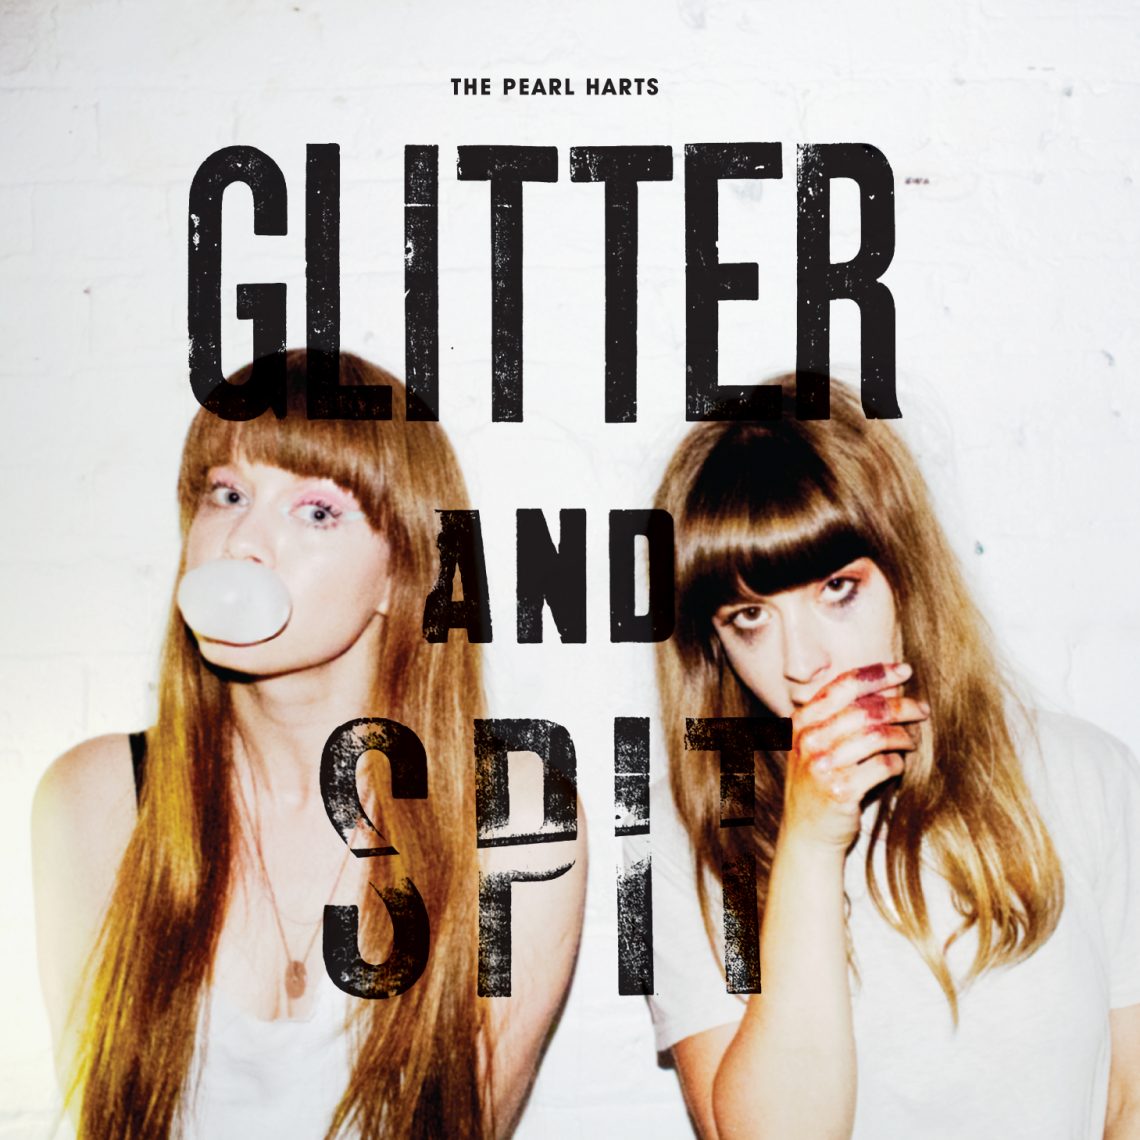 The Pearl Harts – Glitter And Spit (Album Review)